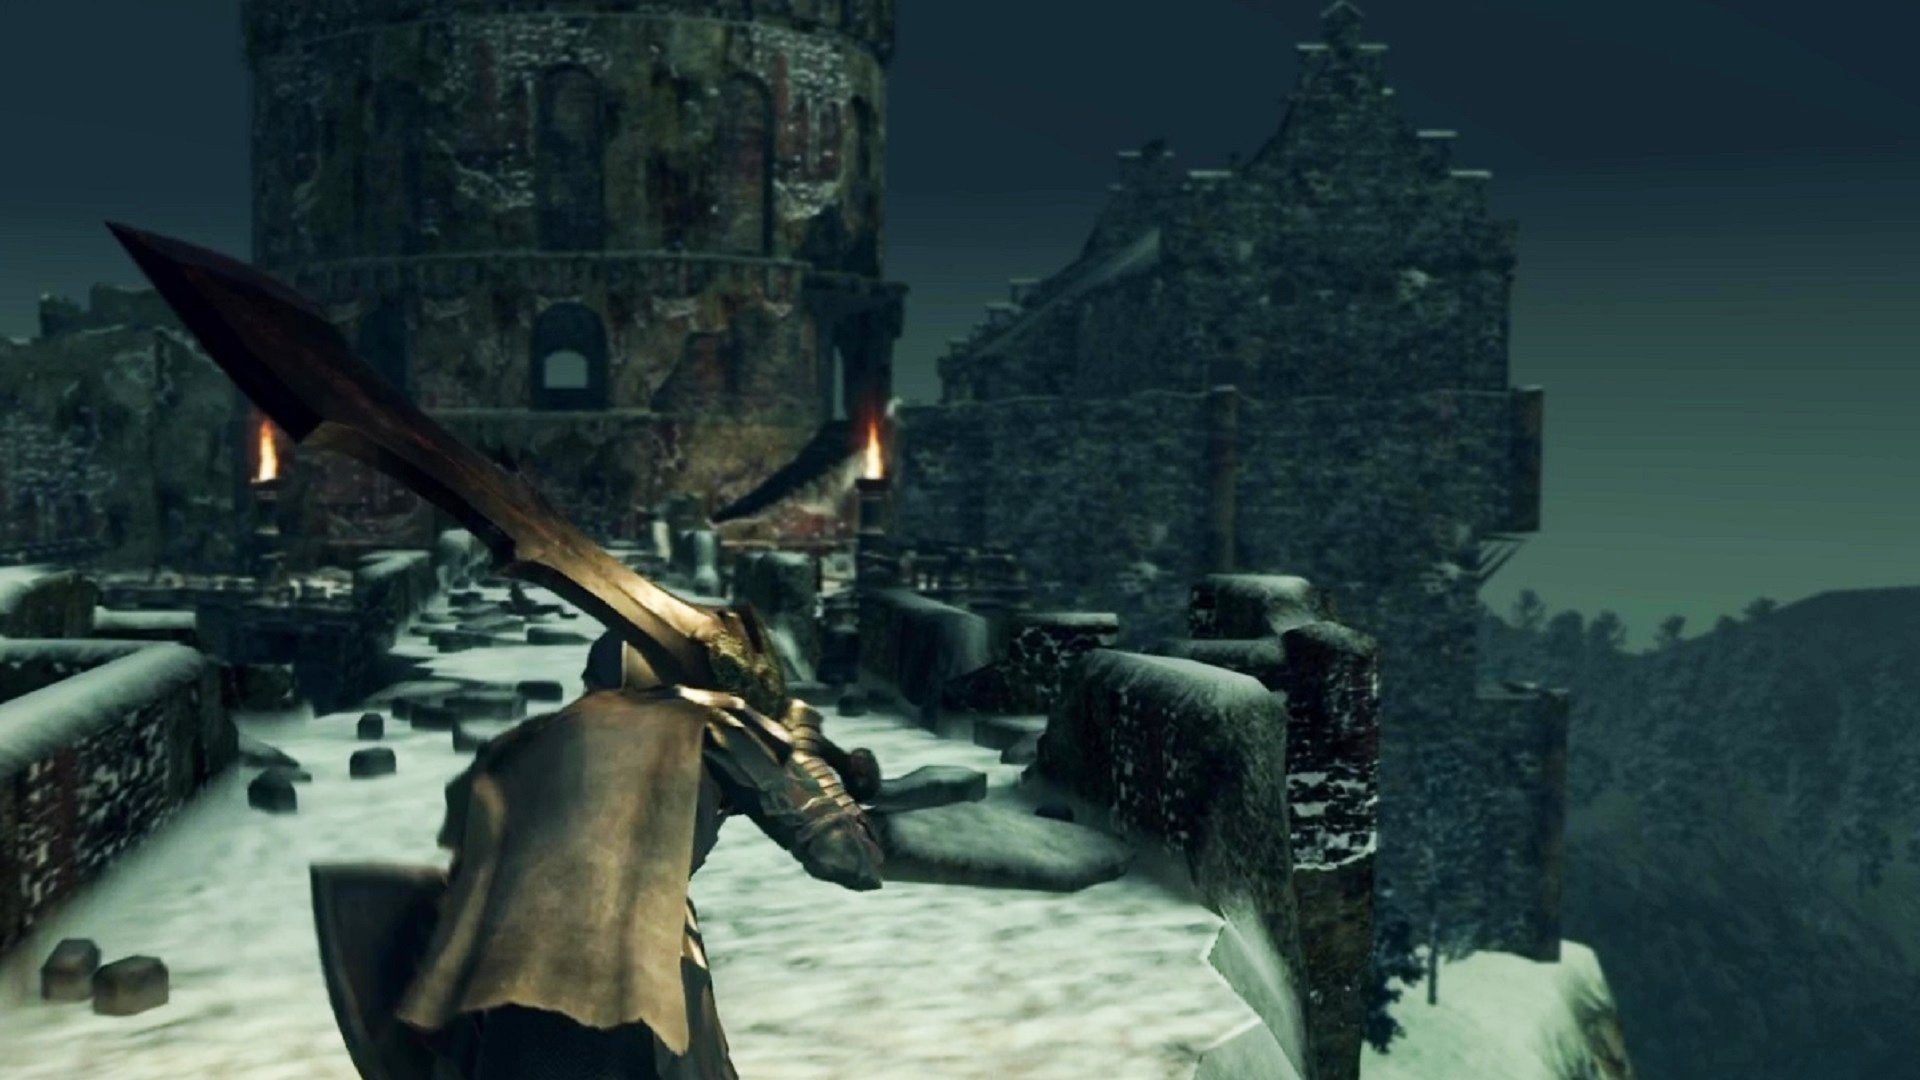 The player entering the Painted World of Ariamis in Dark Souls.